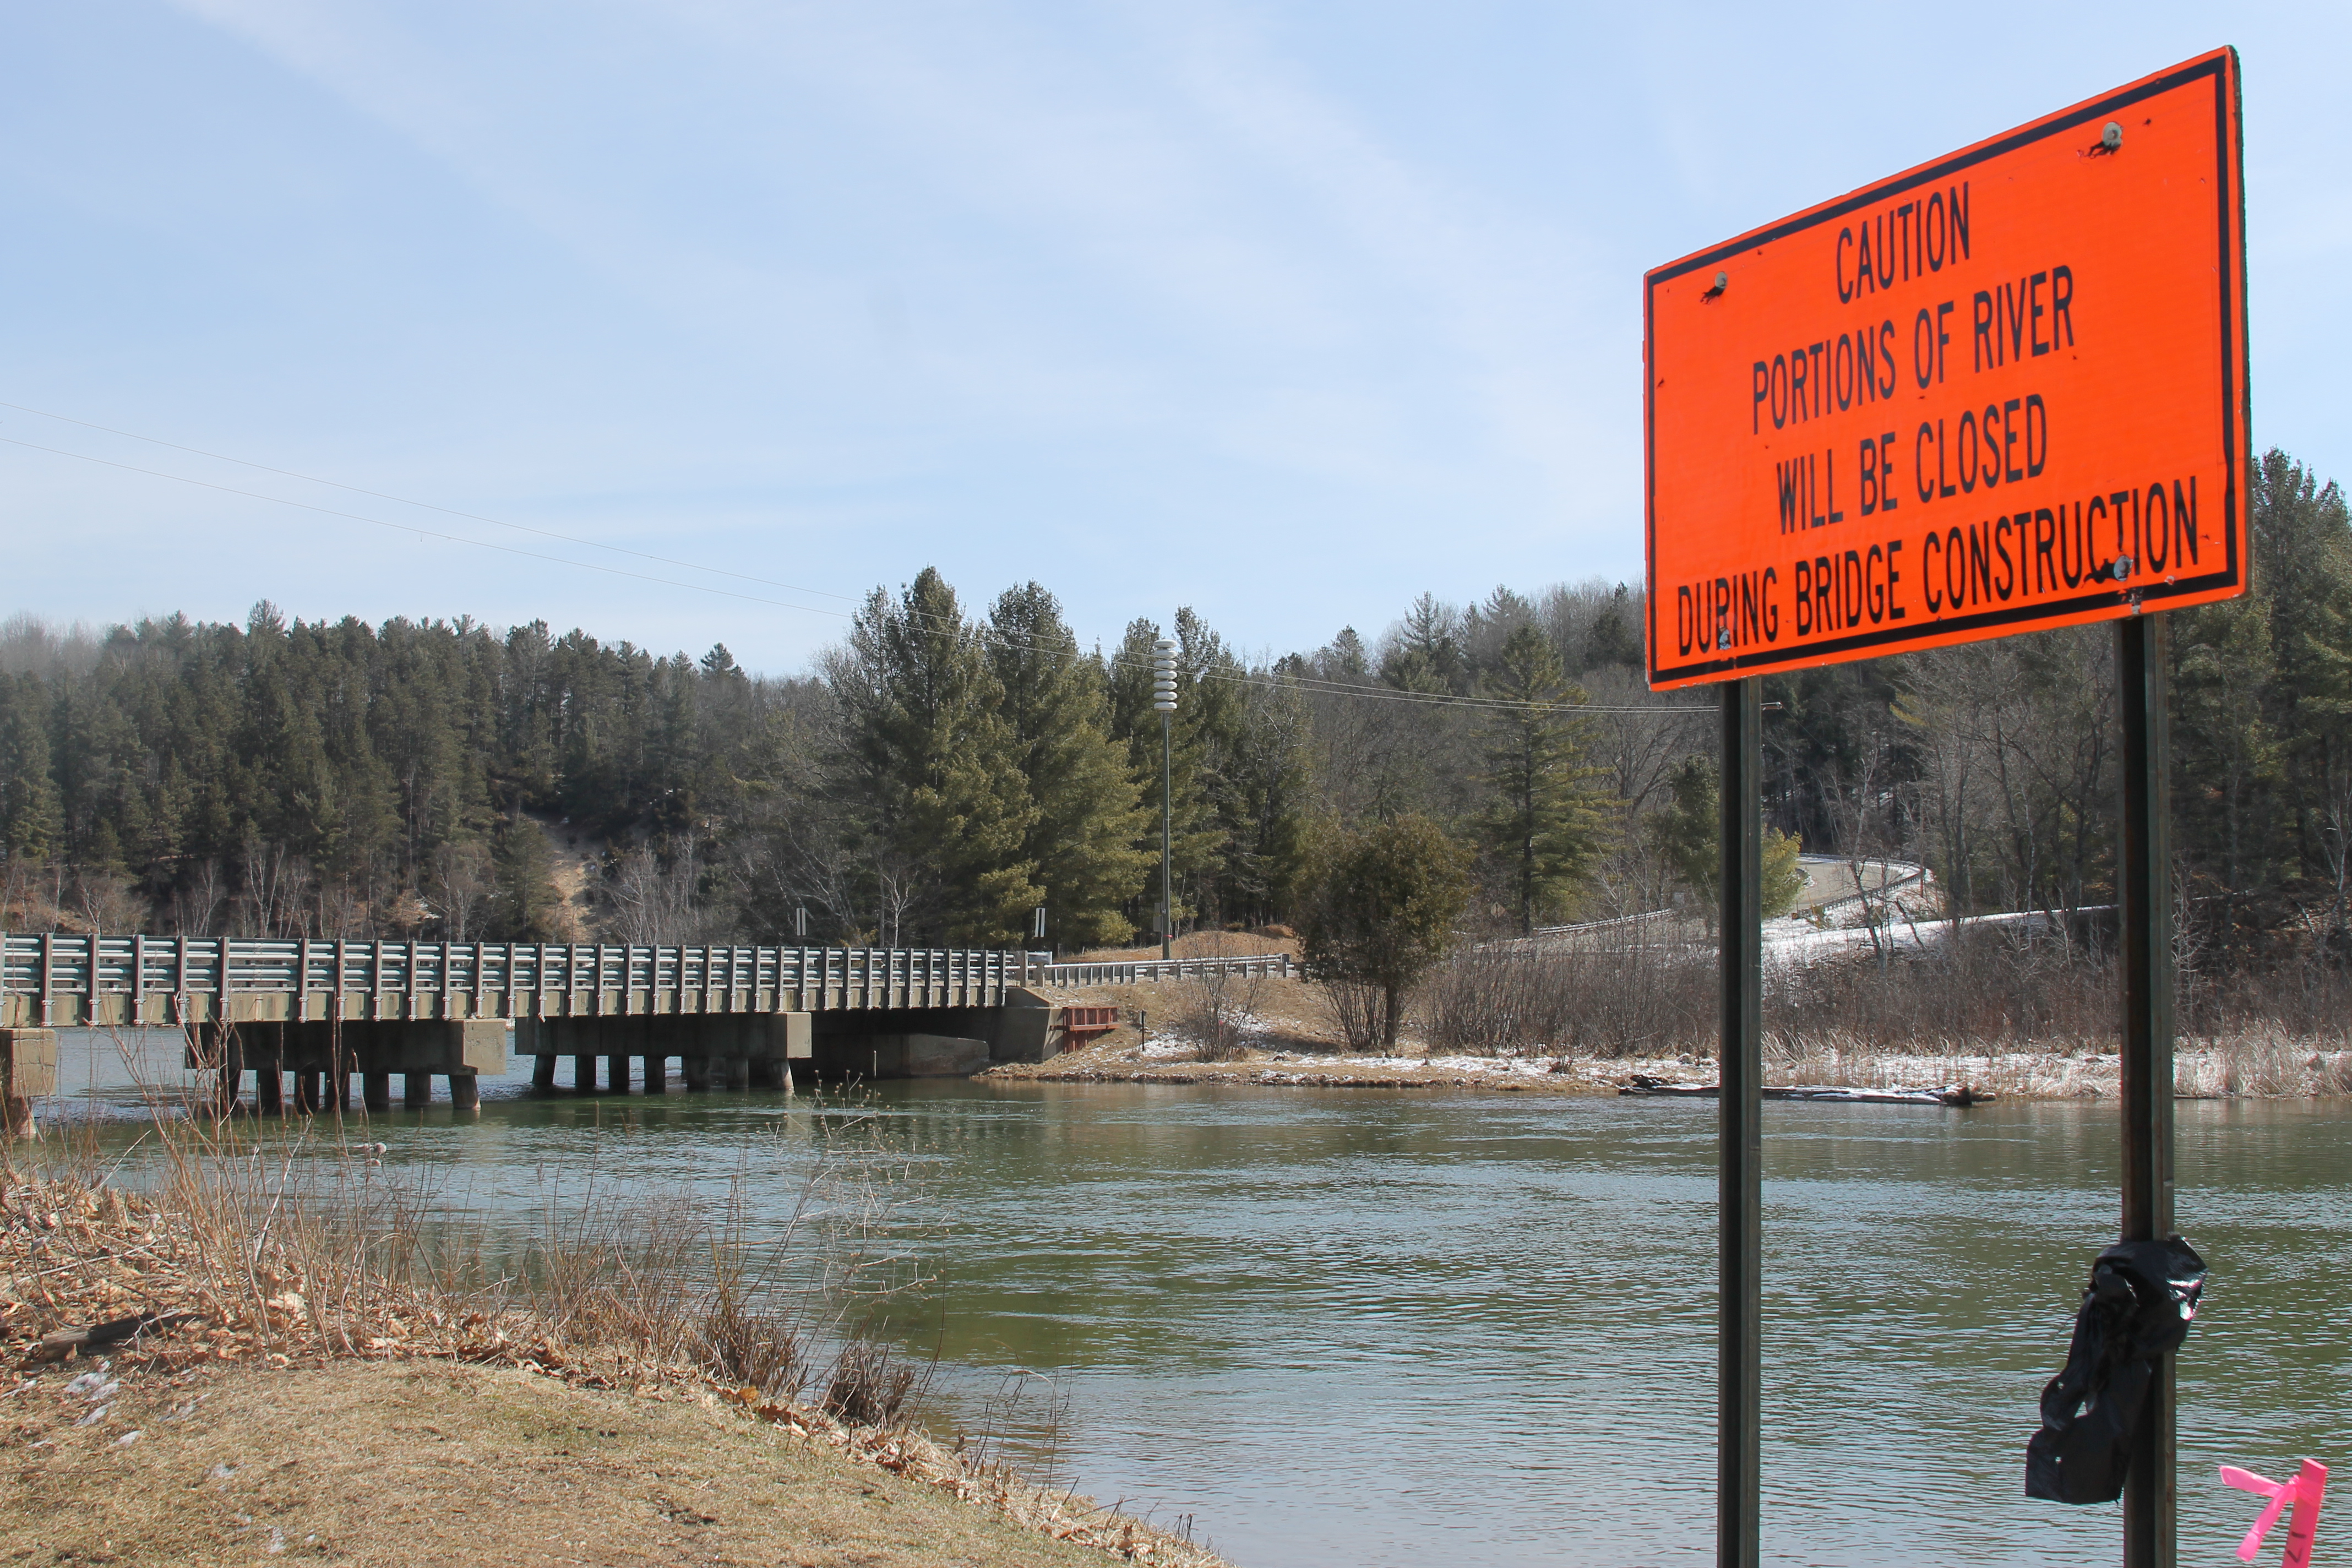 Red Bridge project still expected to begin in April - Manistee News